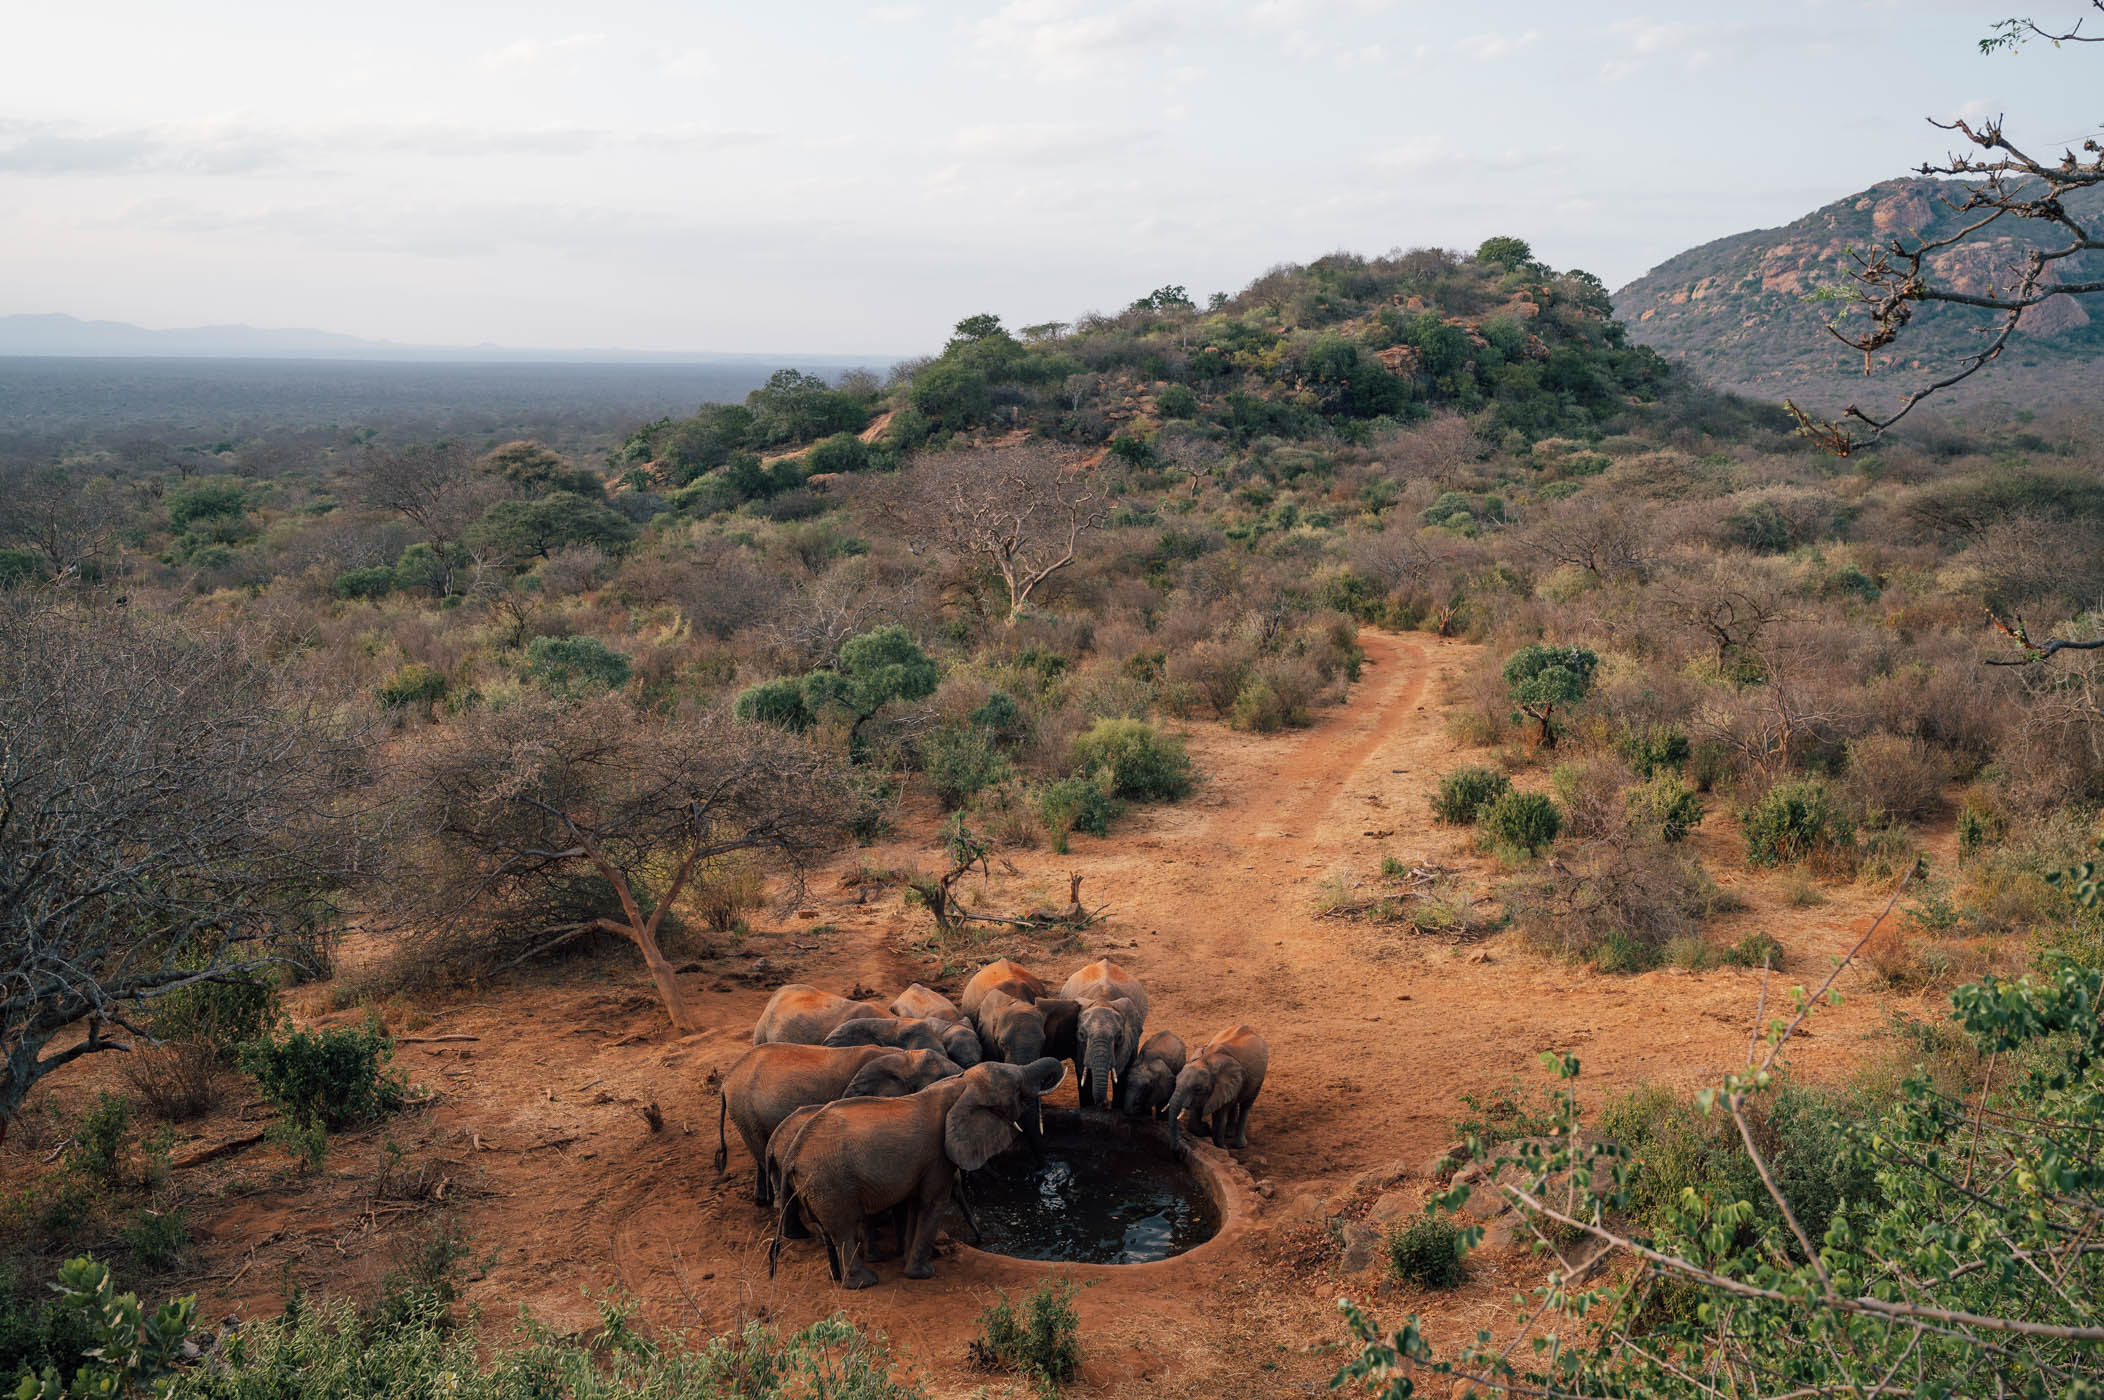 Elephants at the water hole of Kipalo Hills